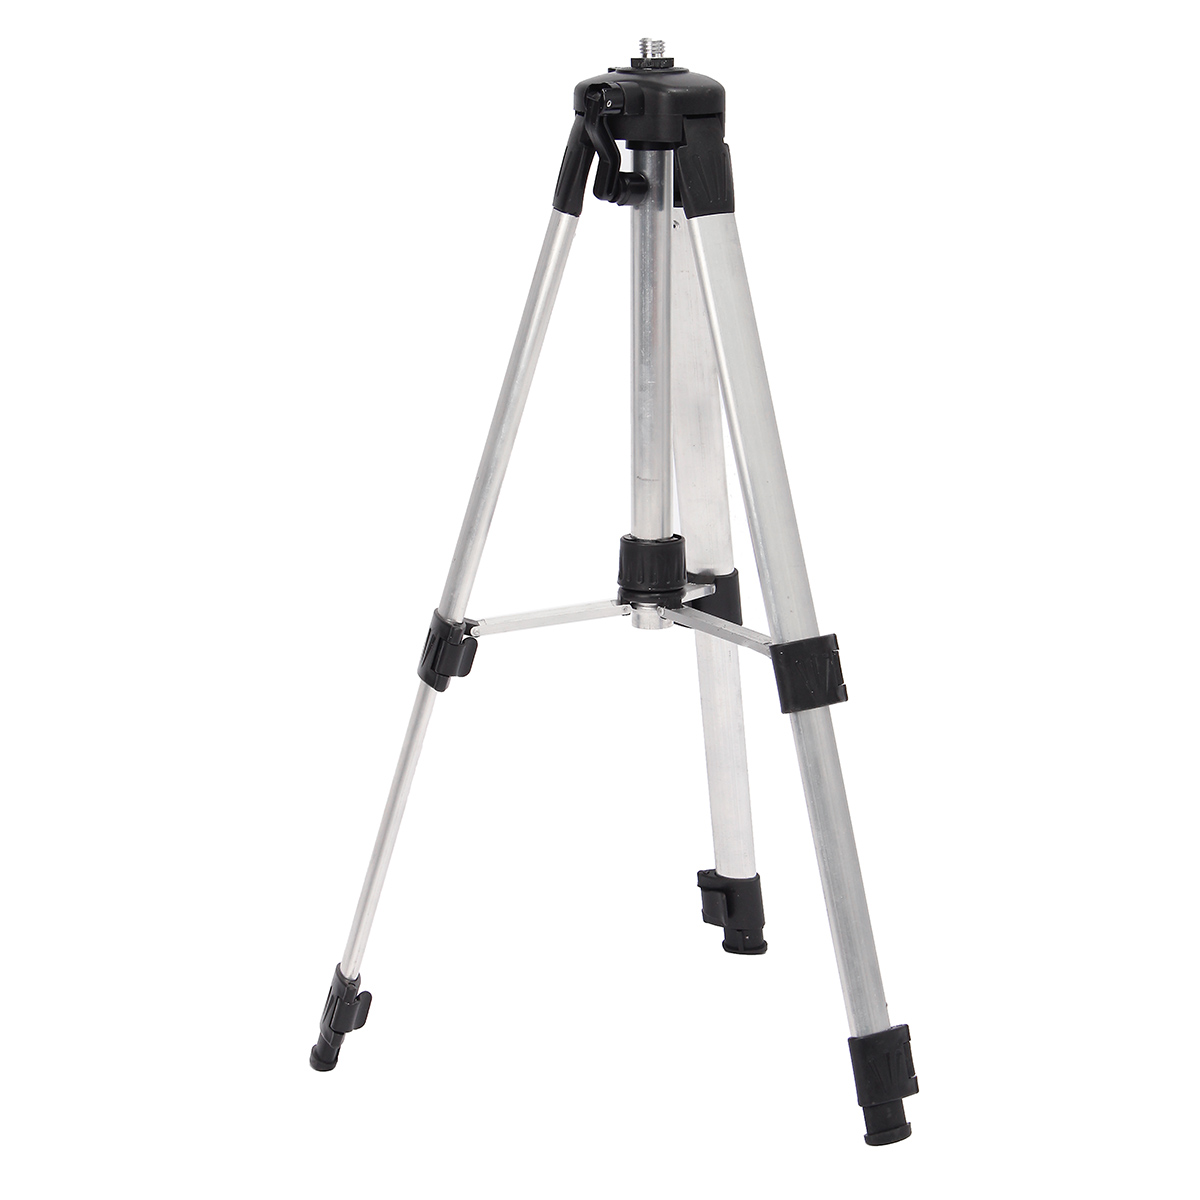 12M-Tripod-Level-Stand-for-Automatic-Self-Leveling-Laser-Level-Measurement-Tool-1131120-3